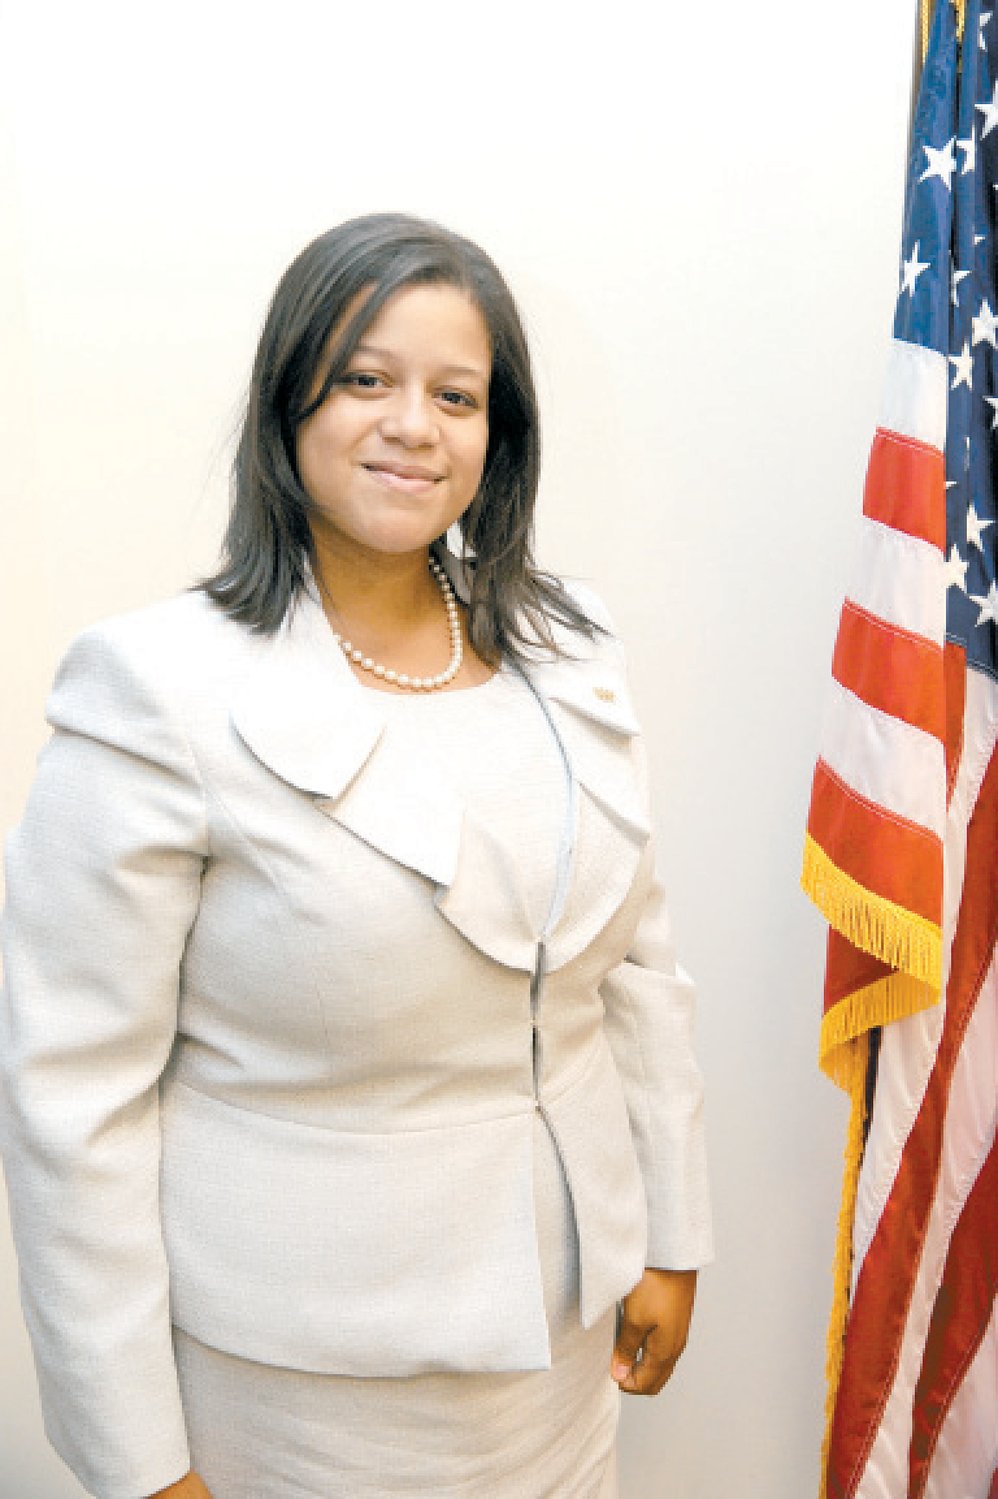 Assemblywoman Michaelle Solages was a co-sponsor of the legalization bill in the Assembly.